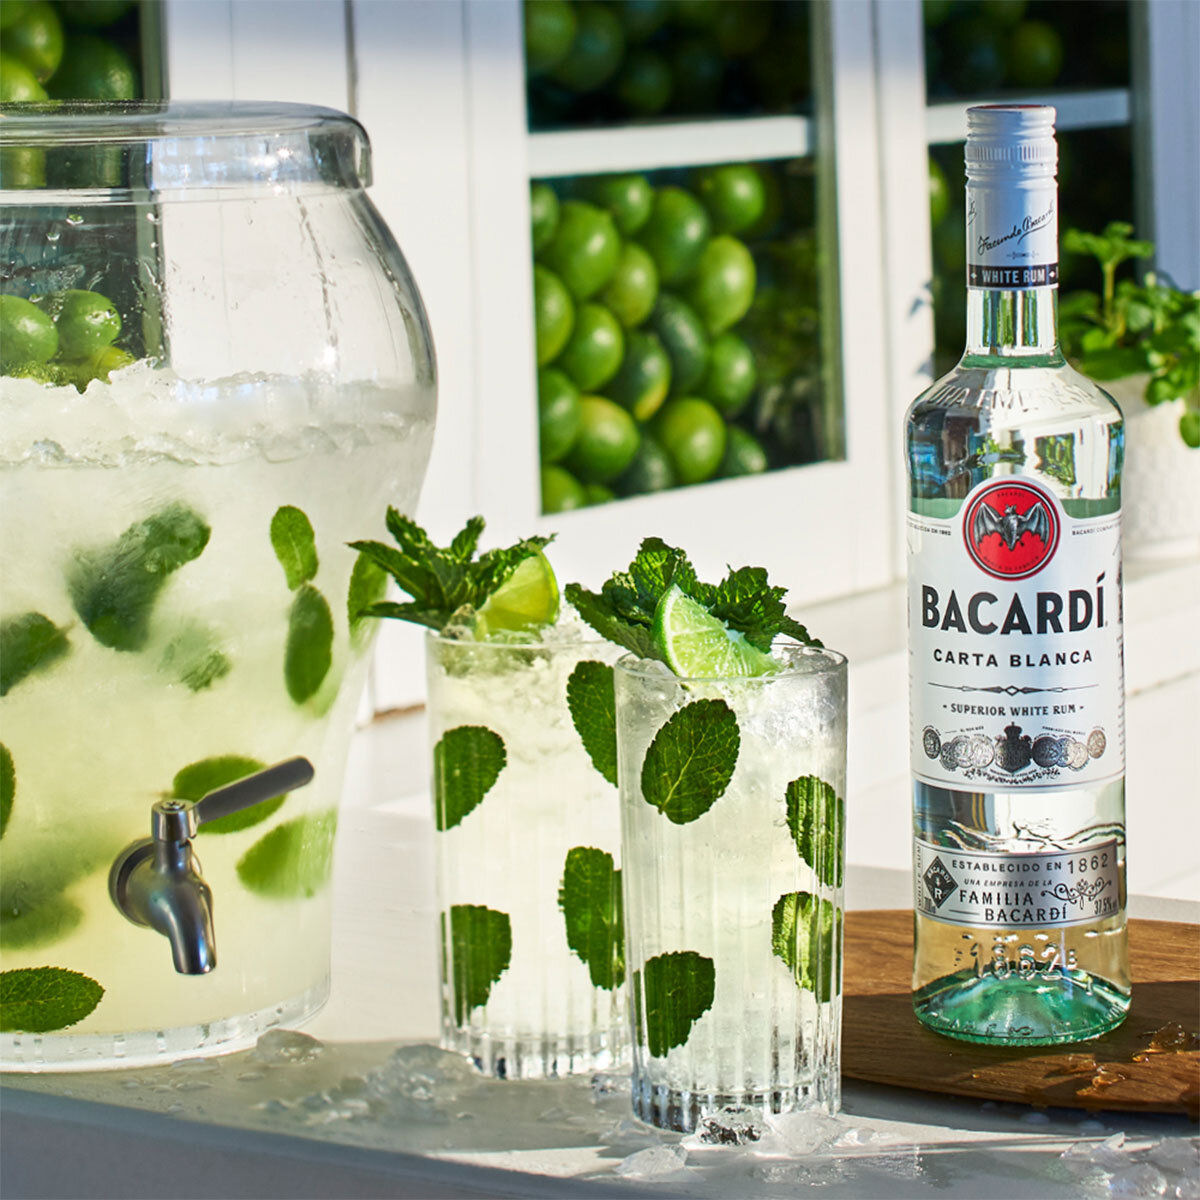 Bacardi Carta Blanca Rum, with 2 glasses and a jug